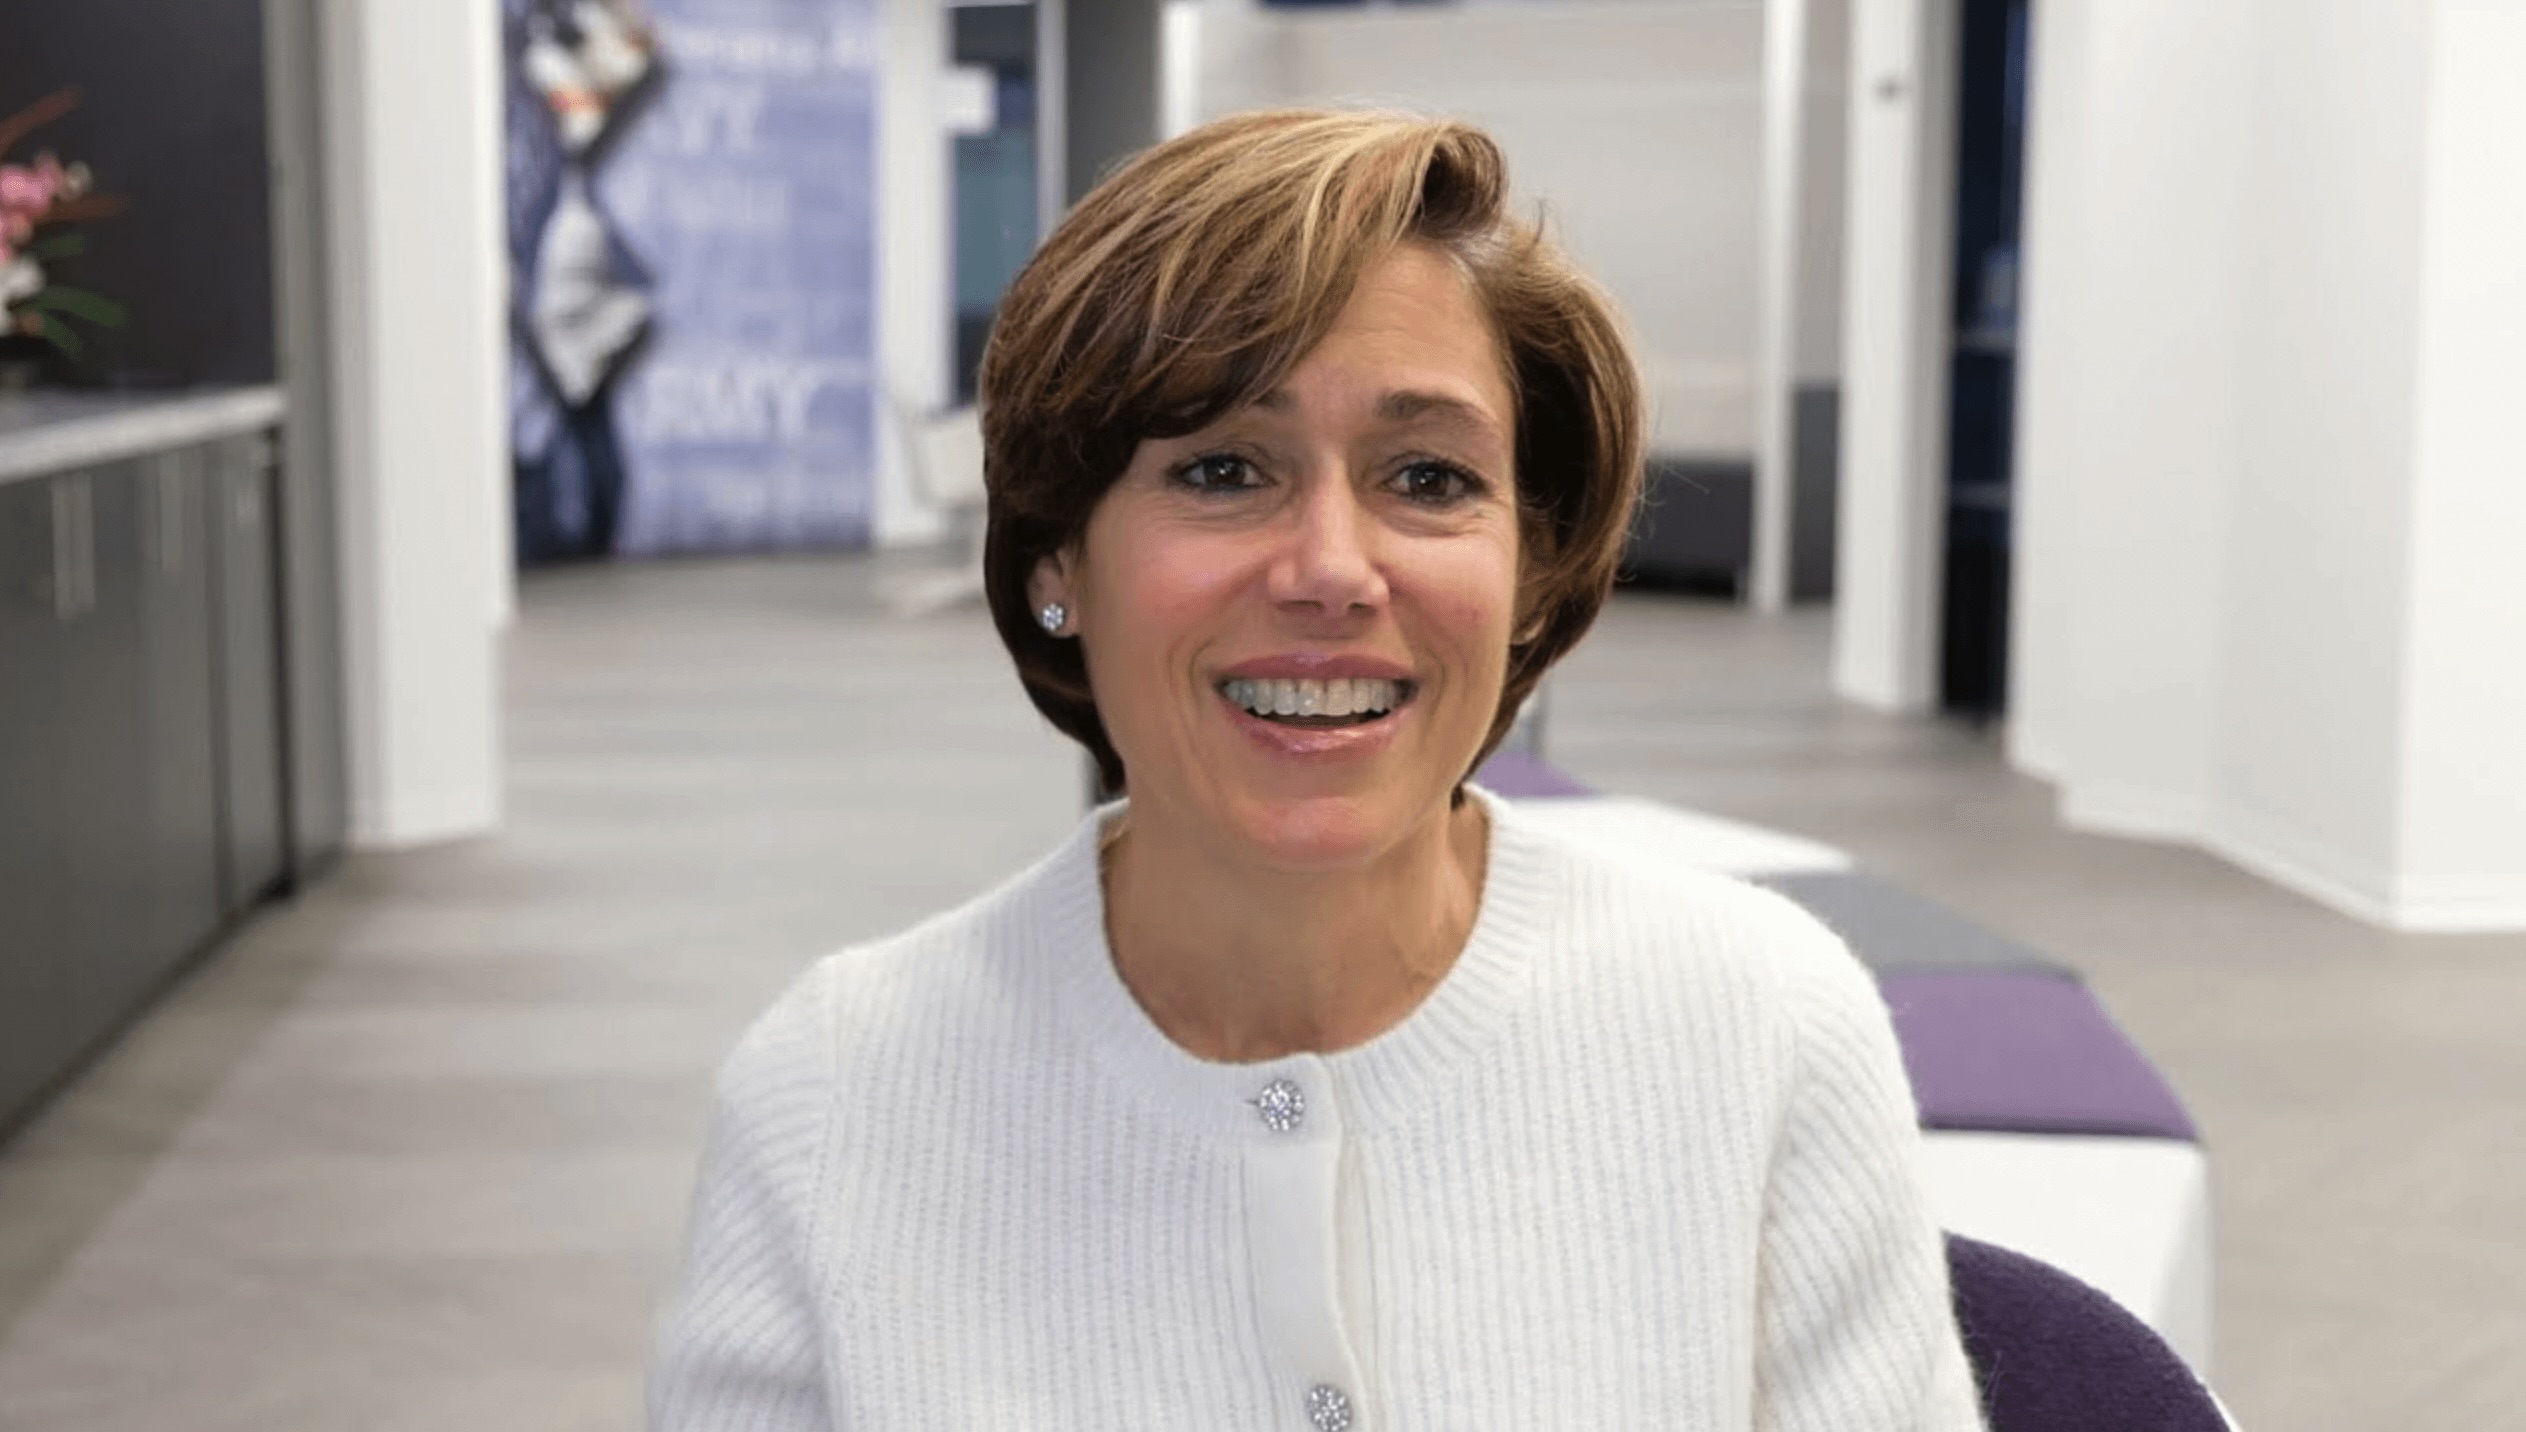 Gina Grosso smiling in a white cardigan, seated in a Human Resources office hallway with purple and gray seating in the background.